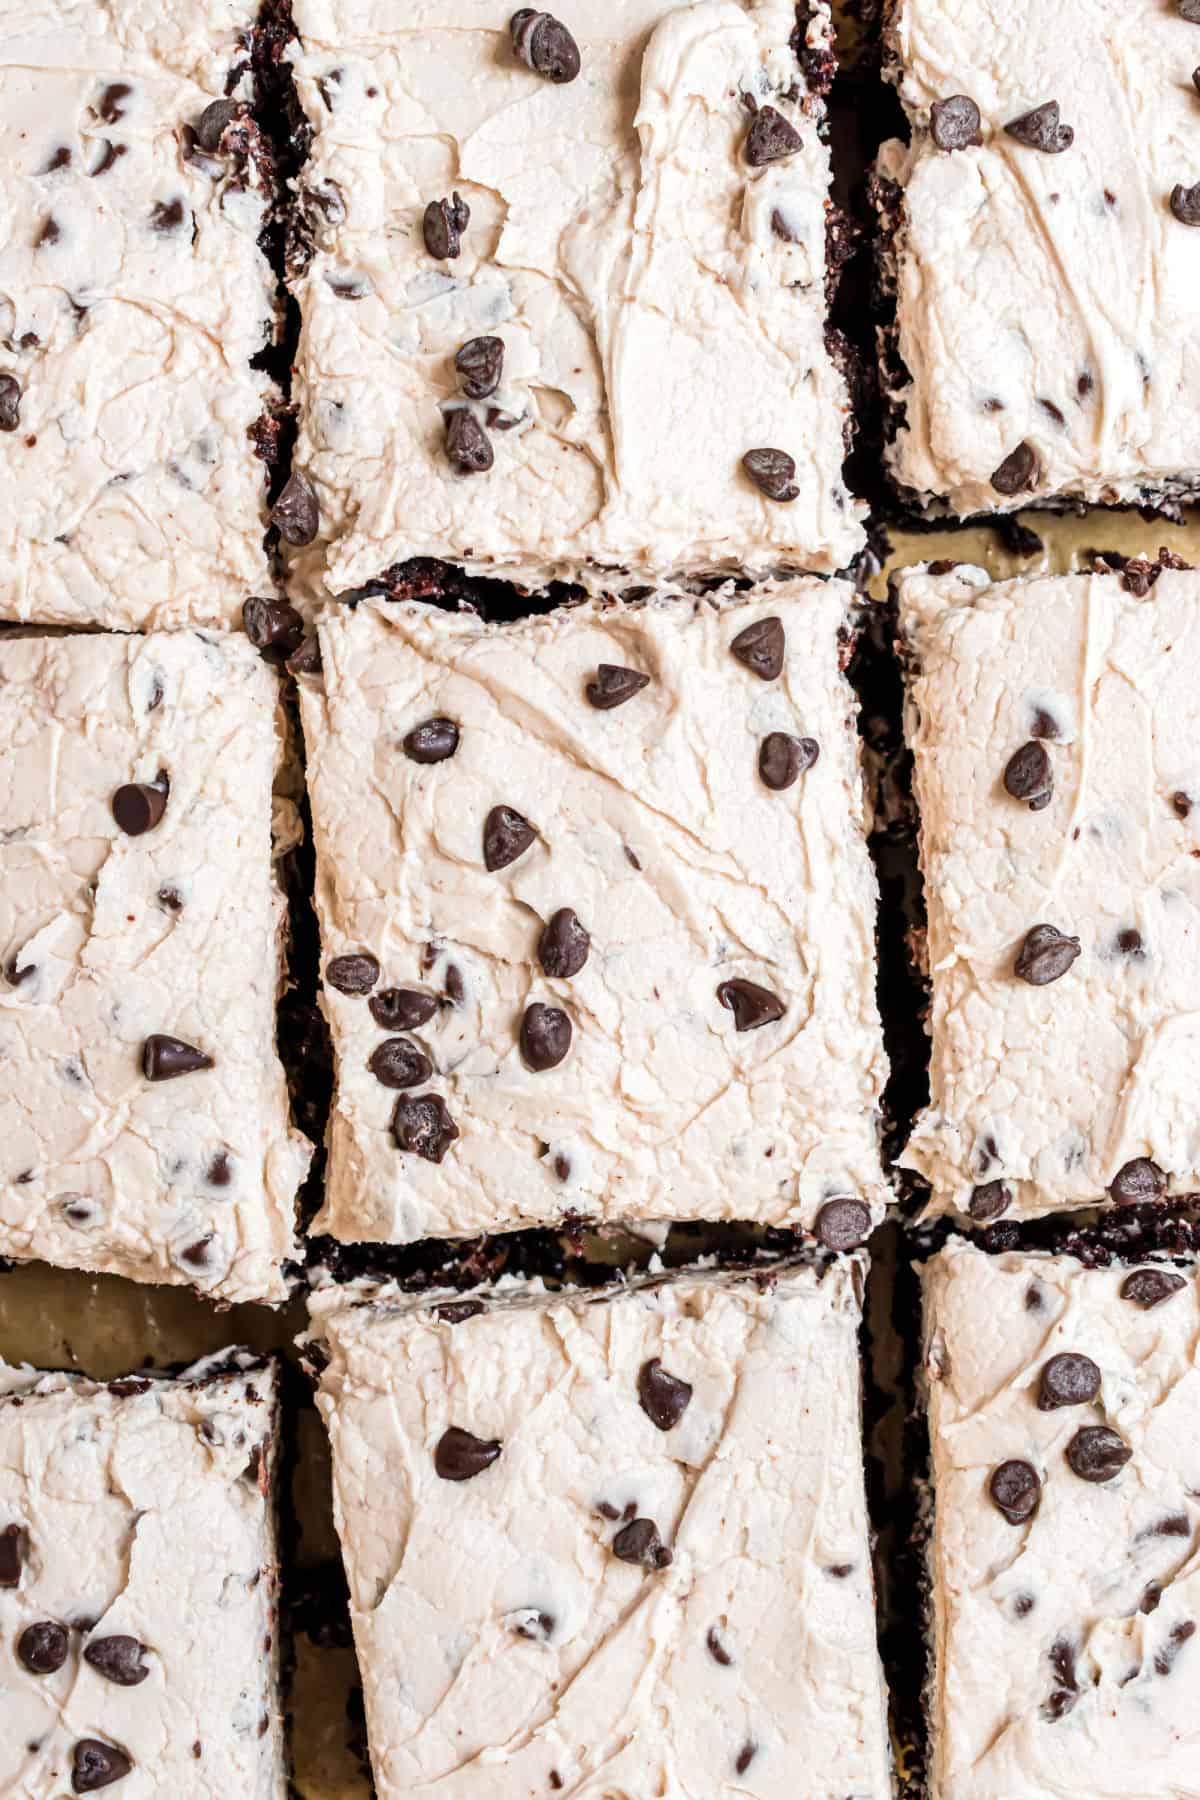 Chocolate chip frosted brownies.